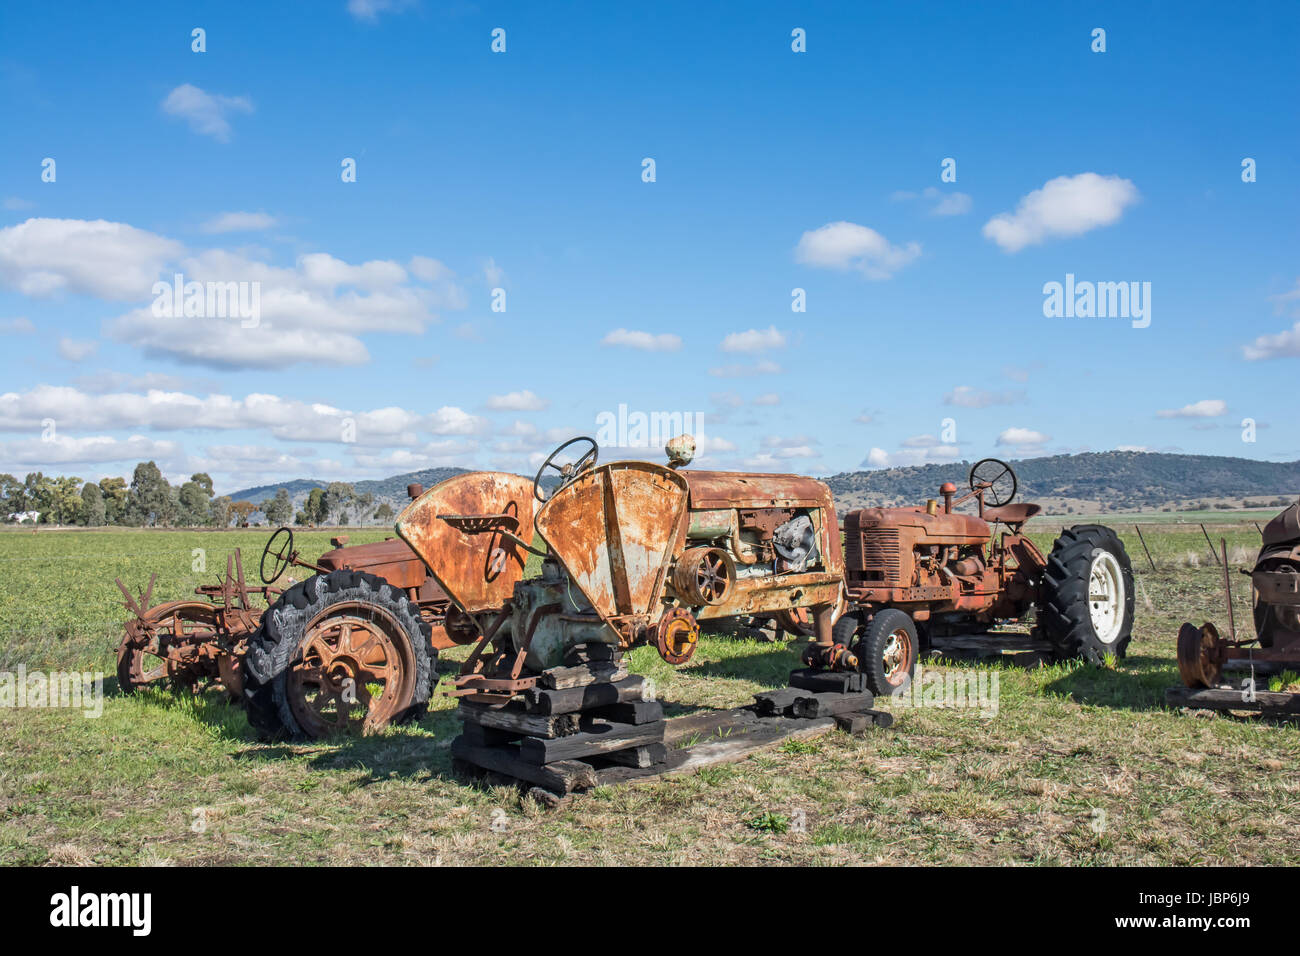 Rusty Old Farm Tractors in a Rural Paddock. Stock Photo